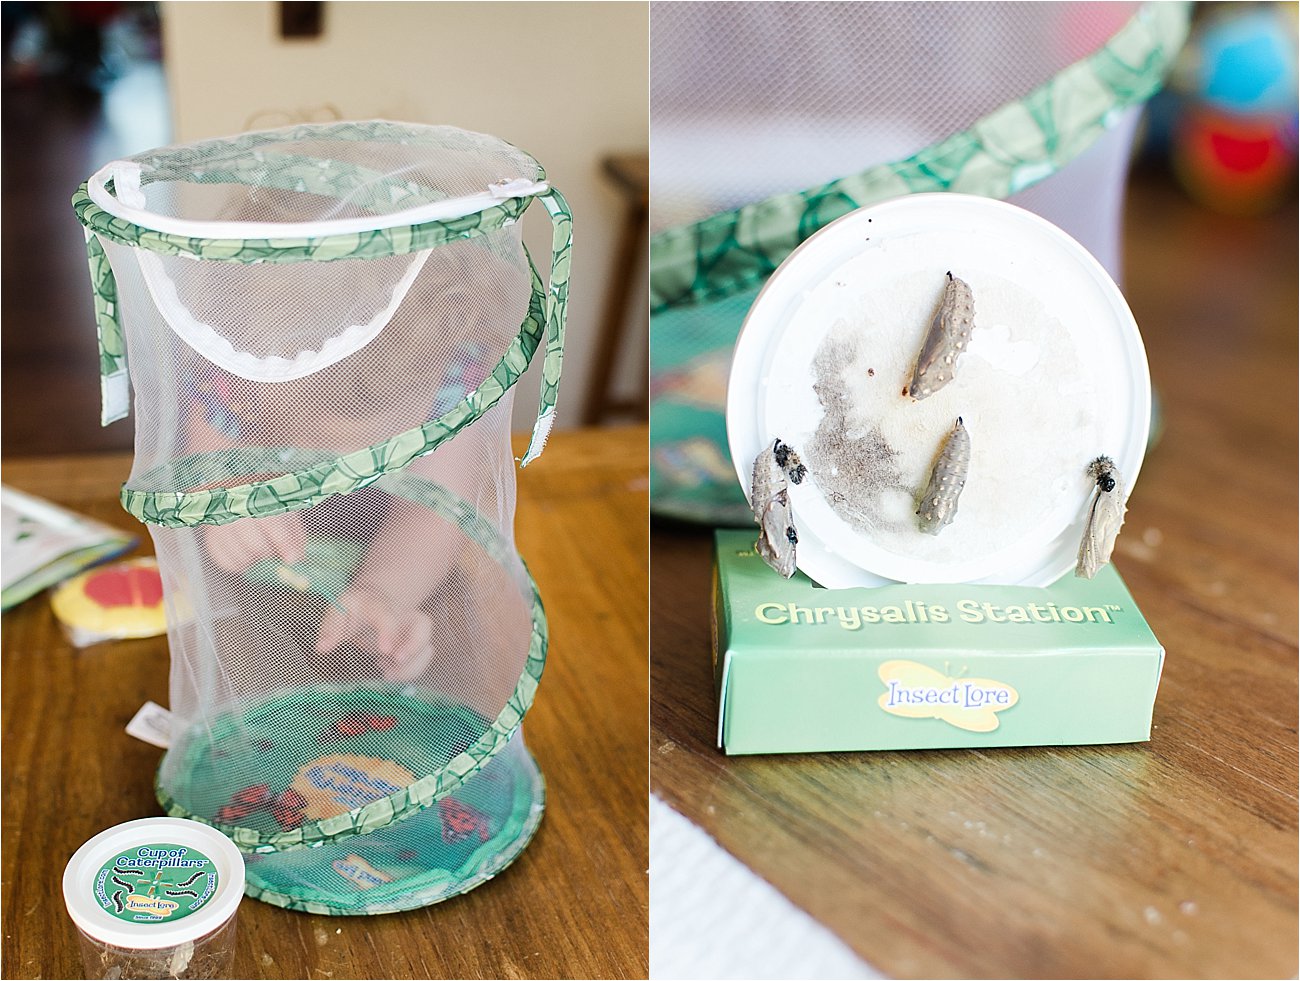 "Growing Butterflies at Home" - Insect Lore Original Butterfly Garden Review by lifestyle blogger Still Being Molly